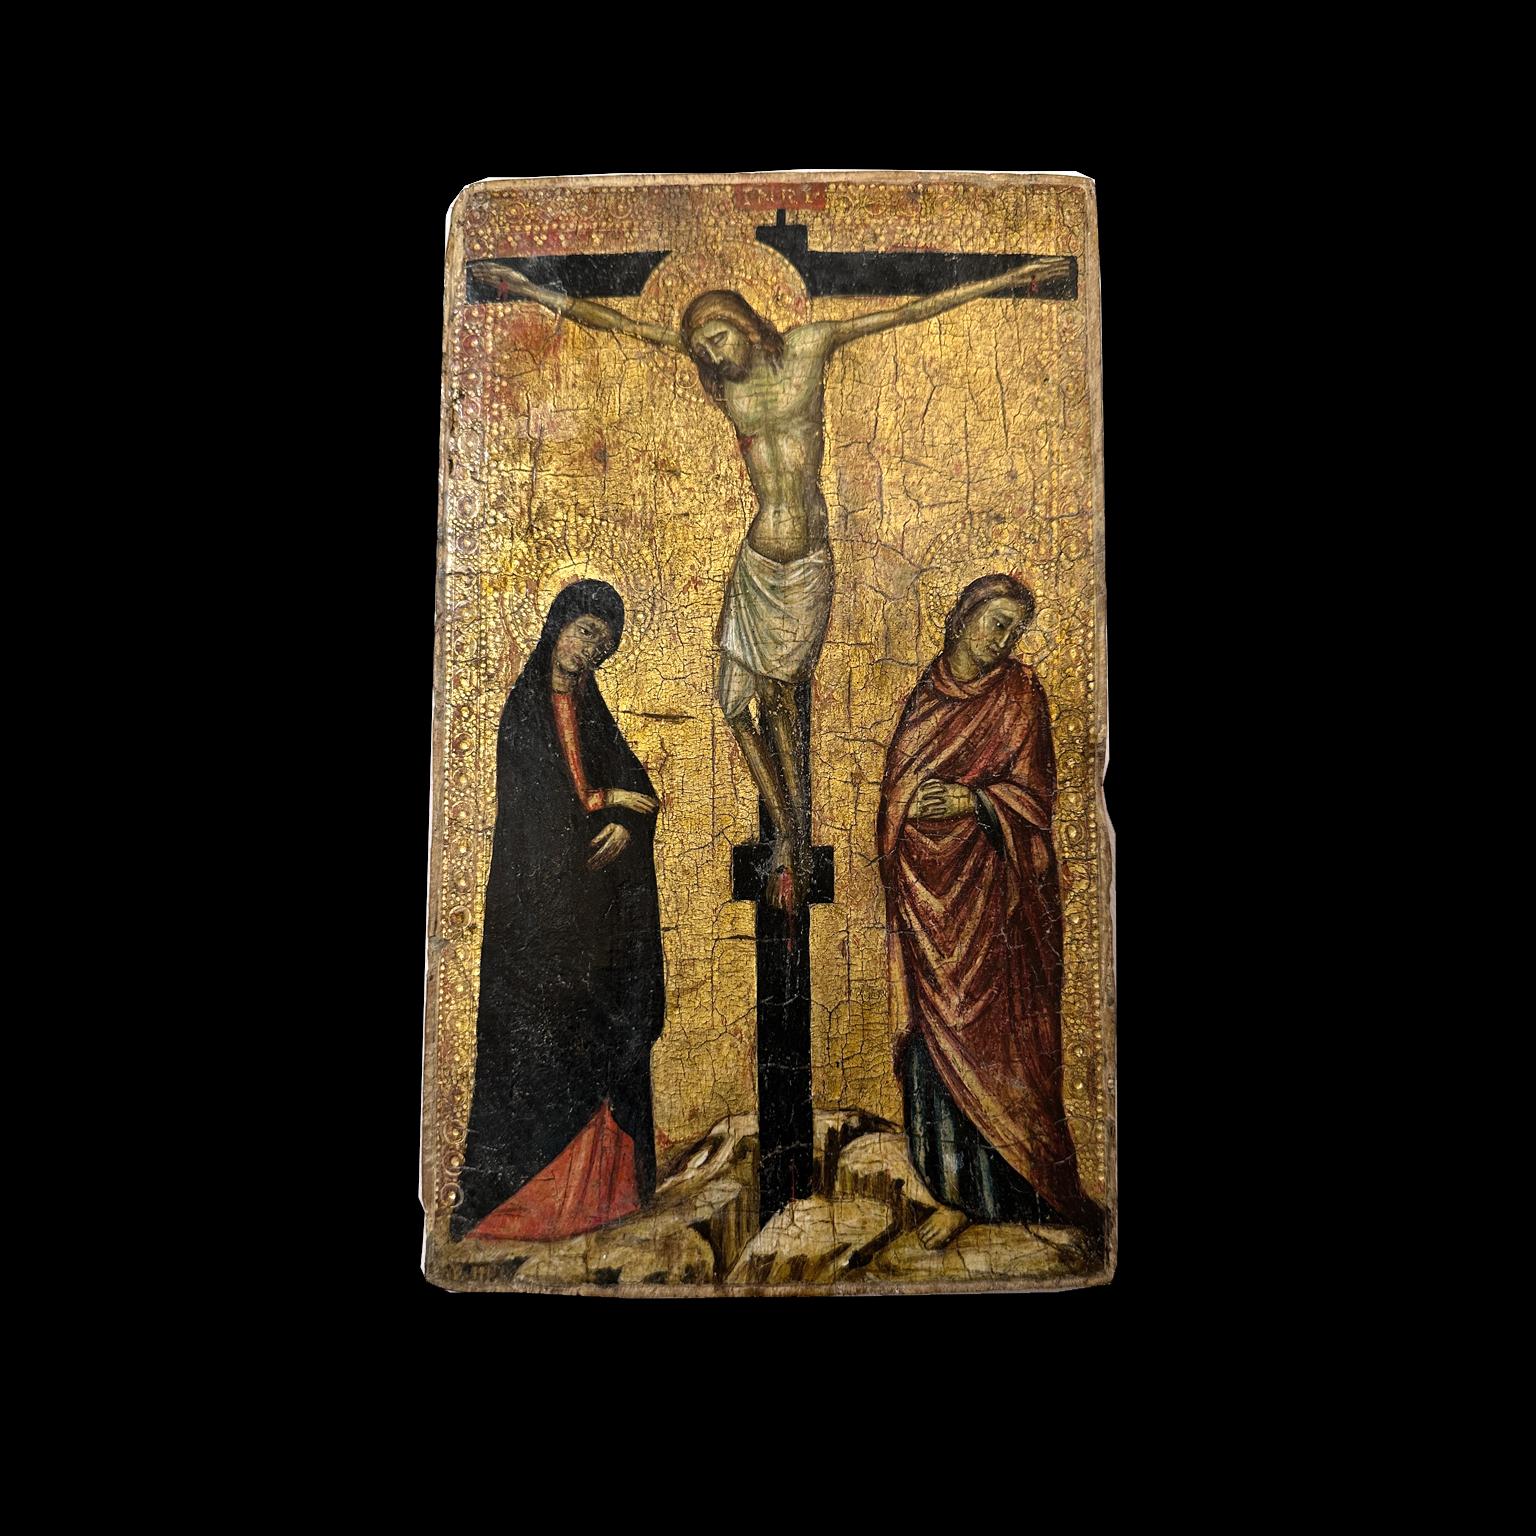 This splendid wooden plaque with a golden Tuscan background and dating back to the Late Middle Ages is attributed to a Sienese master active around the 14th century. Painted on an engraved gold background, the plaque depicts the crucifixion of